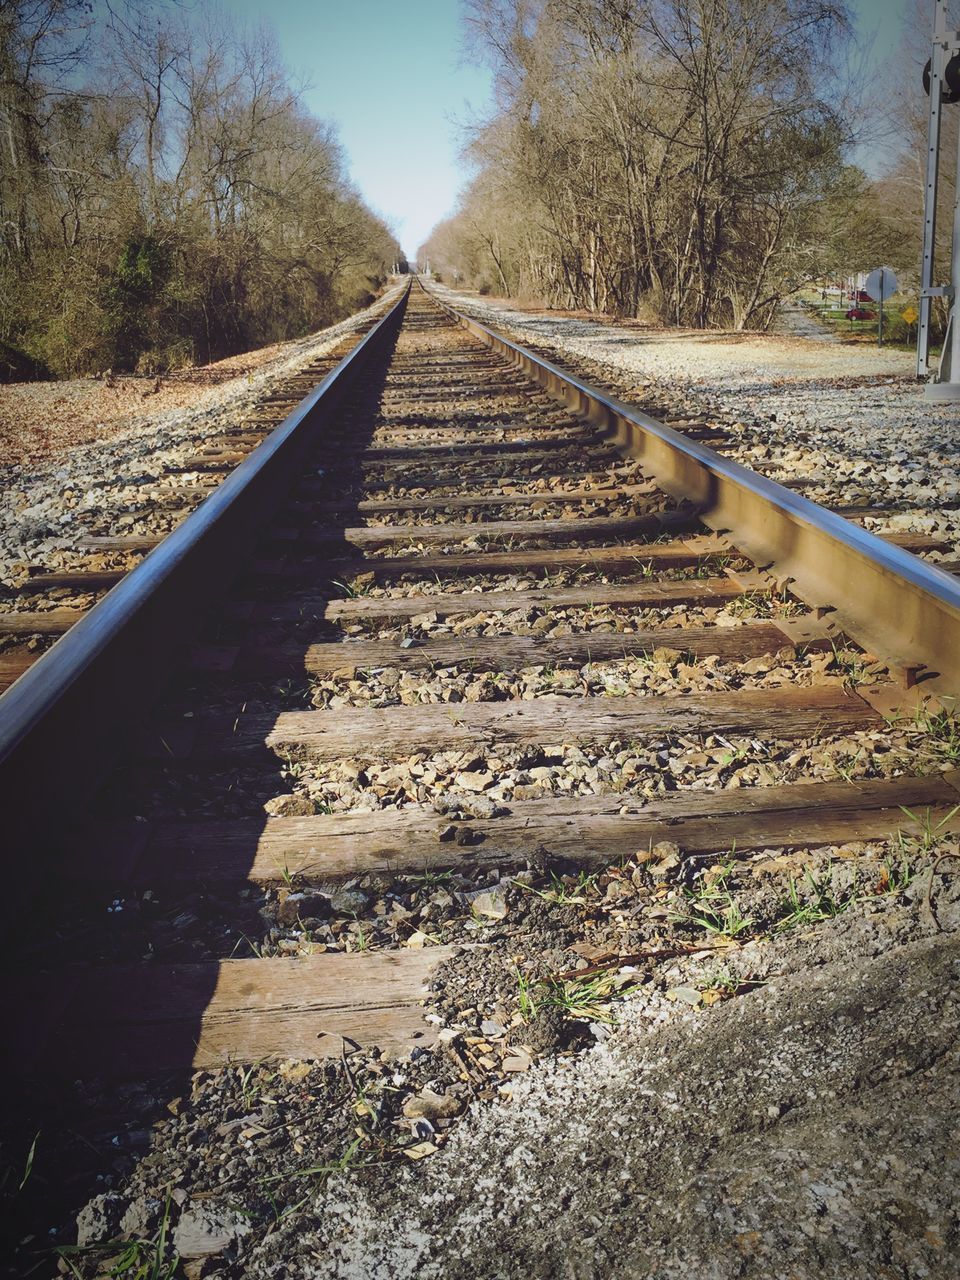 the way forward, diminishing perspective, vanishing point, tree, transportation, surface level, tranquility, nature, railroad track, sky, long, road, day, tranquil scene, landscape, outdoors, sunlight, no people, straight, asphalt